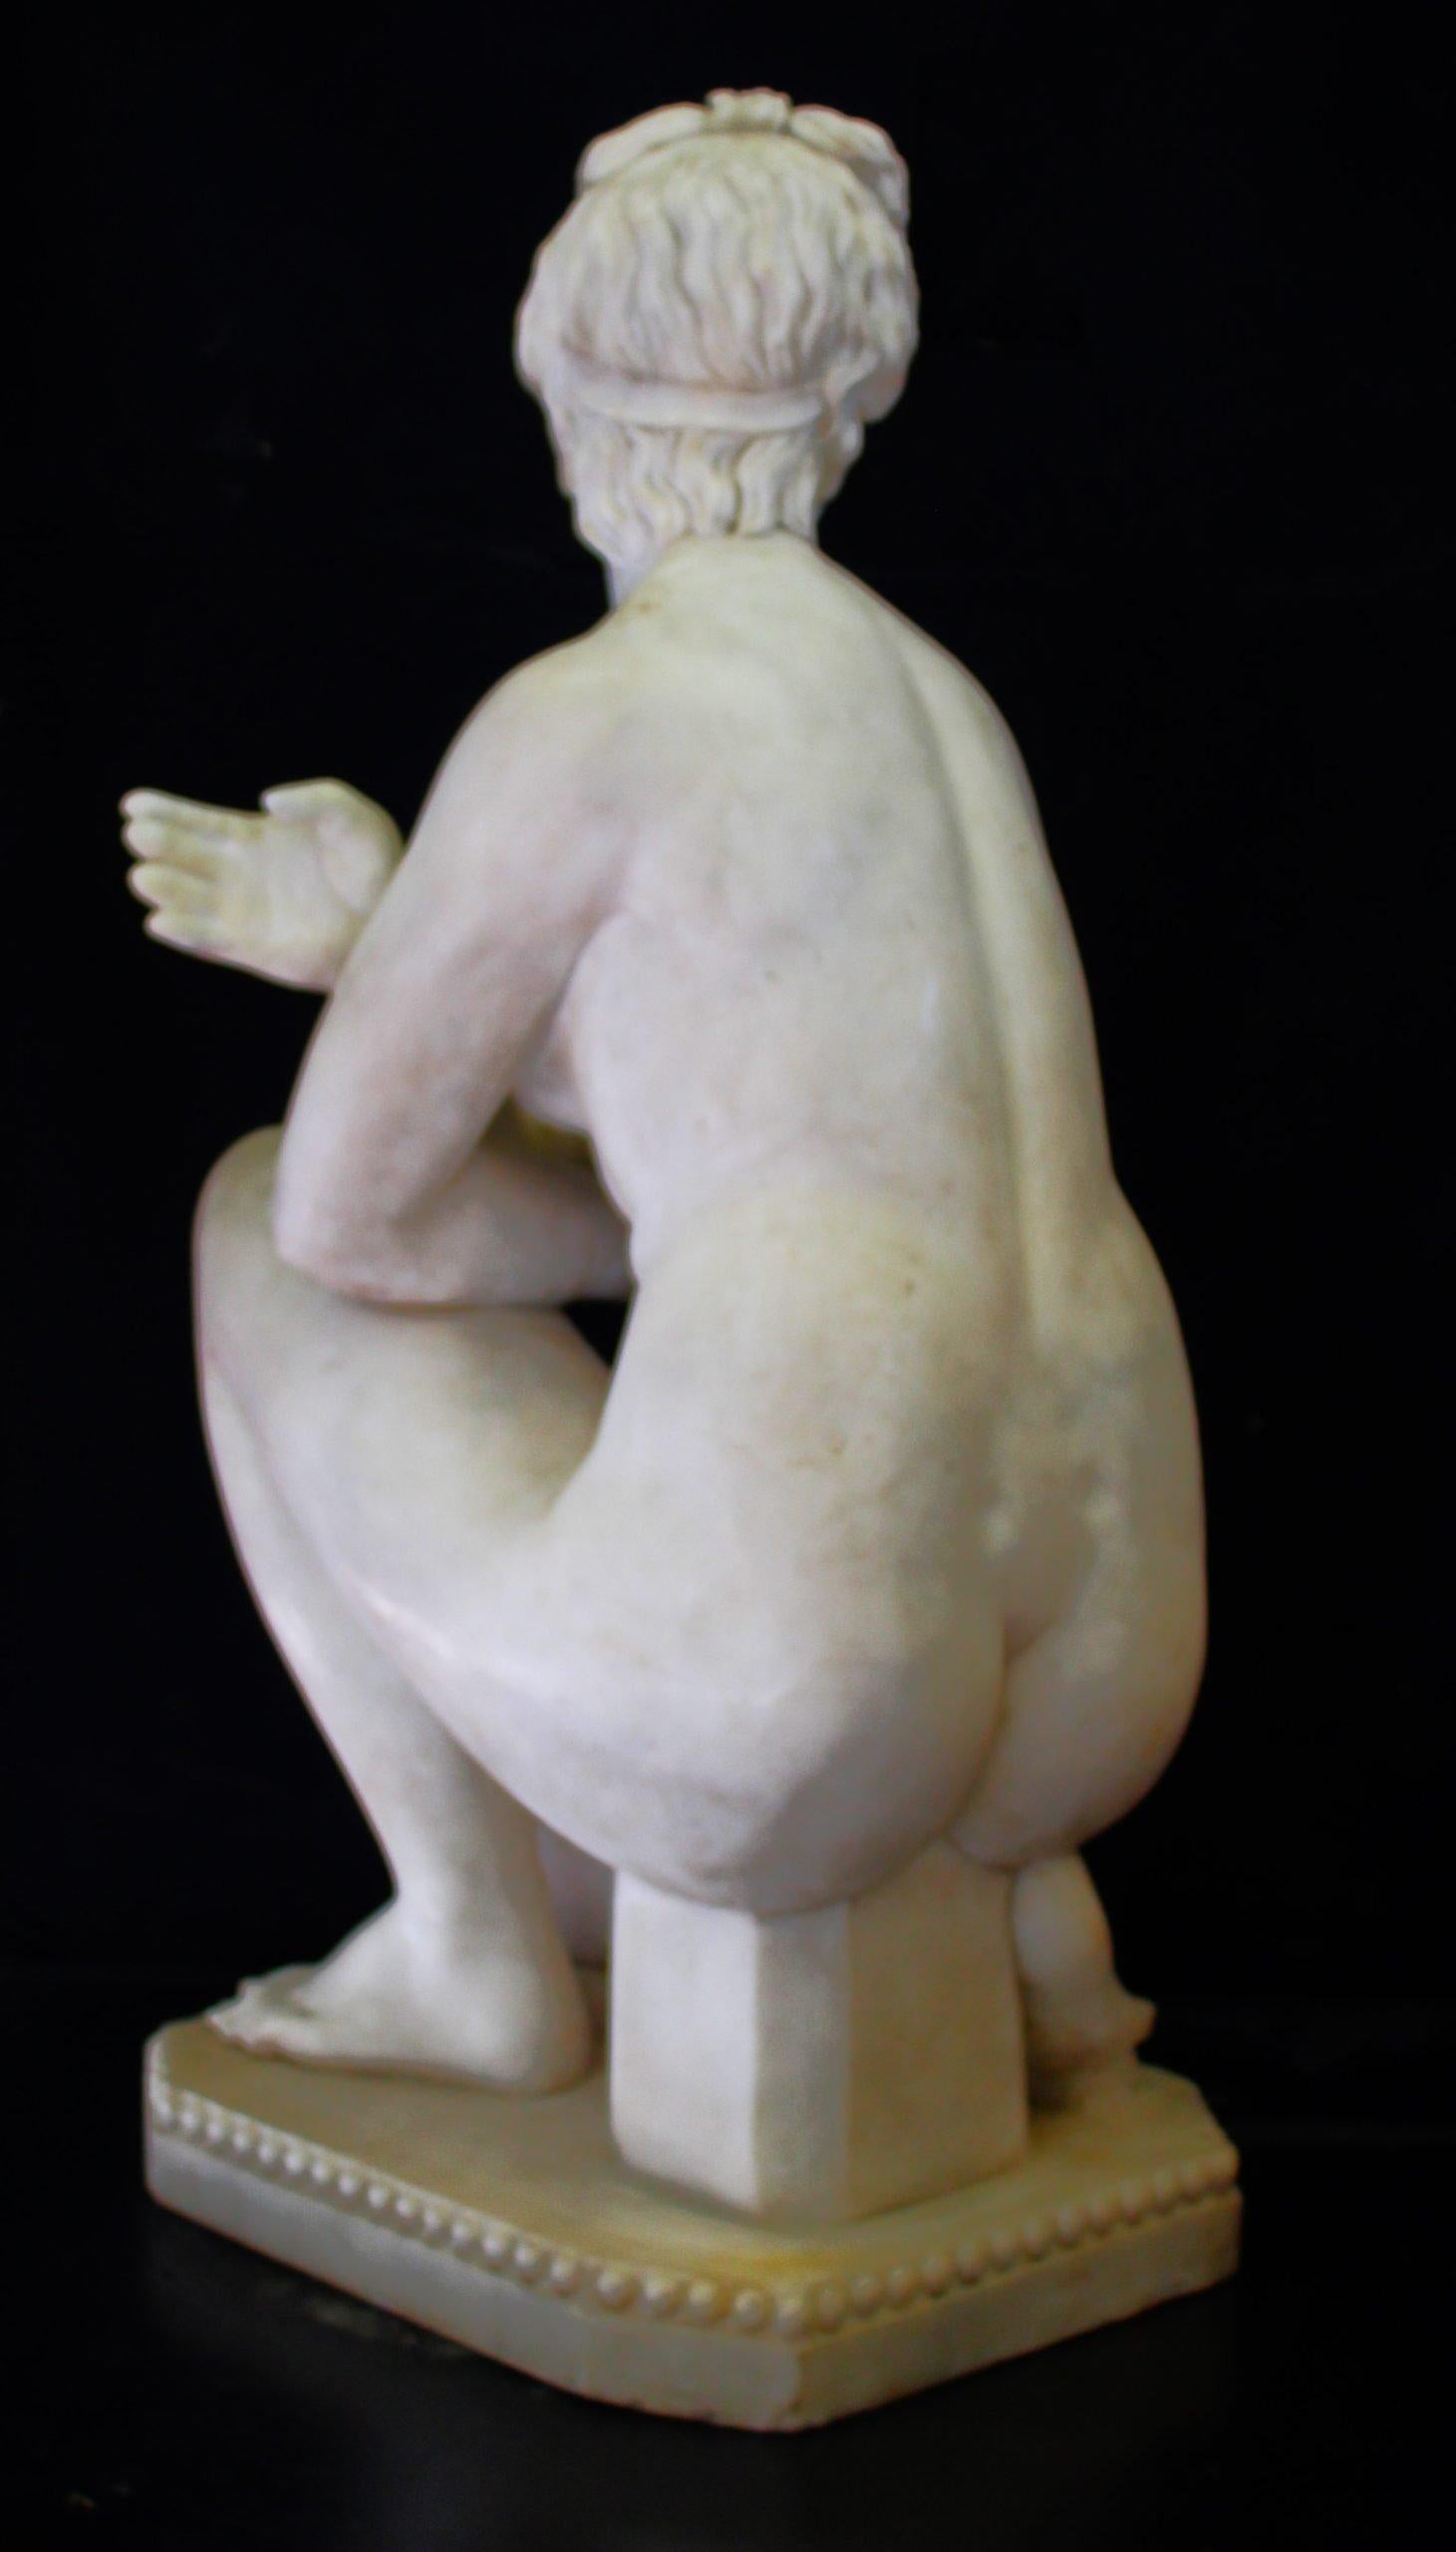 Description
Sculpture, kneeling Venus in white marble. ADDITIONAL PHOTOS, INFORMATION OF THE LOT AND SHIPPING INFORMATION CAN BE REQUEST BY SENDING AN EMAIL. Indicative shipping costs in Italy: 350€ and Europe: 650€.
Tags: Scultura, Venere